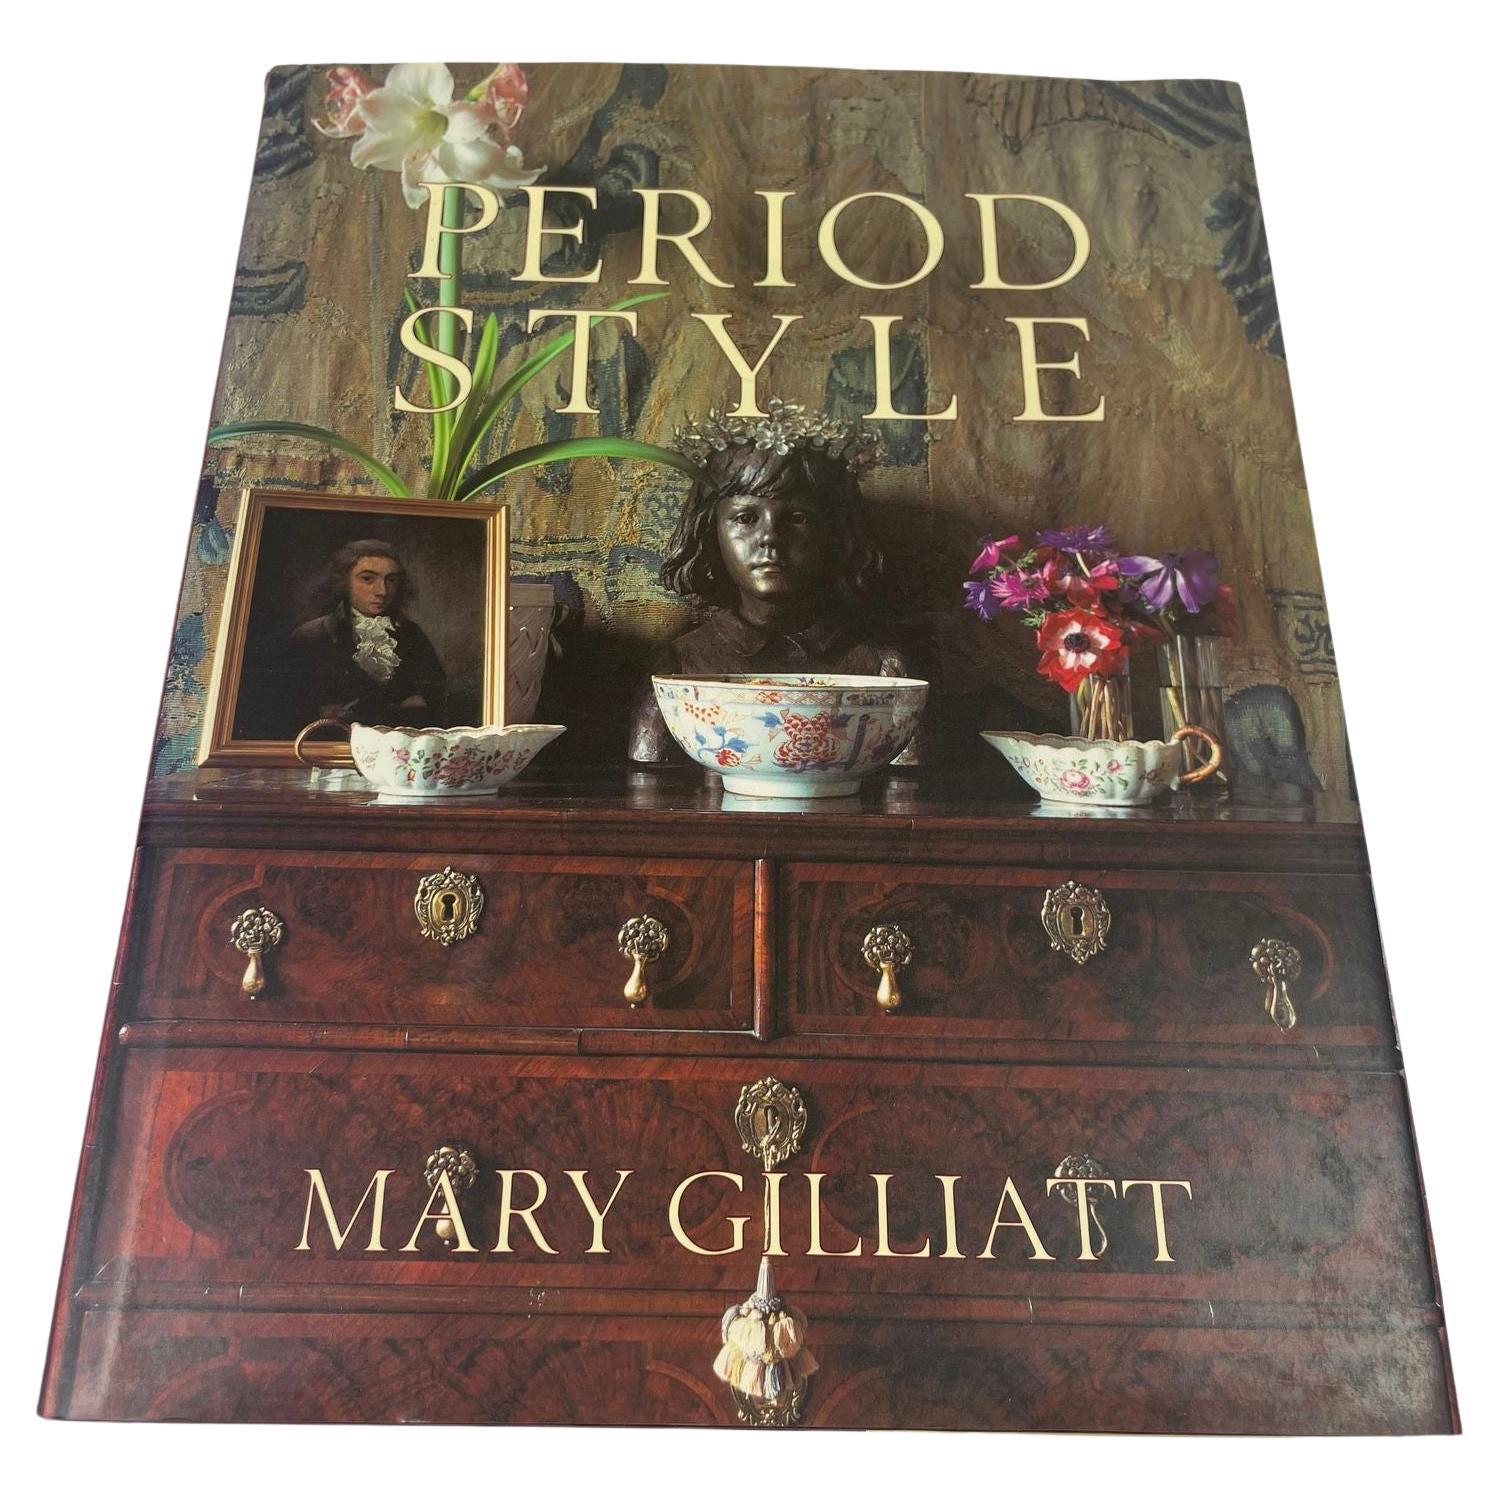 Period Style by Mary Gilliatt Elizabeth Wilhide Hardcover Book For Sale